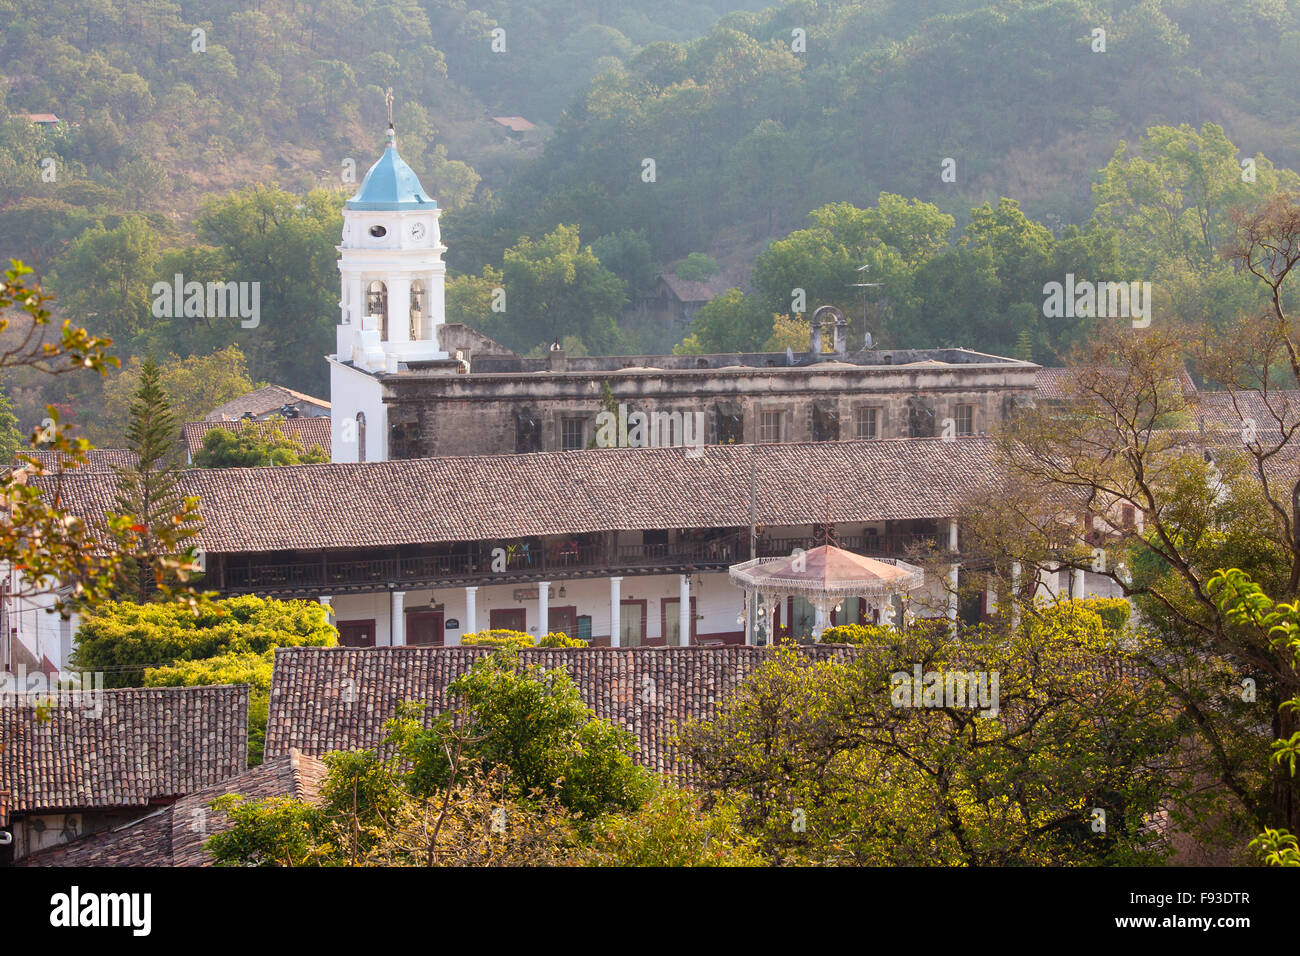 The white steeple of the church greets the morning light in San Sebastian del Oeste, Jalisco, Mexico. Stock Photo